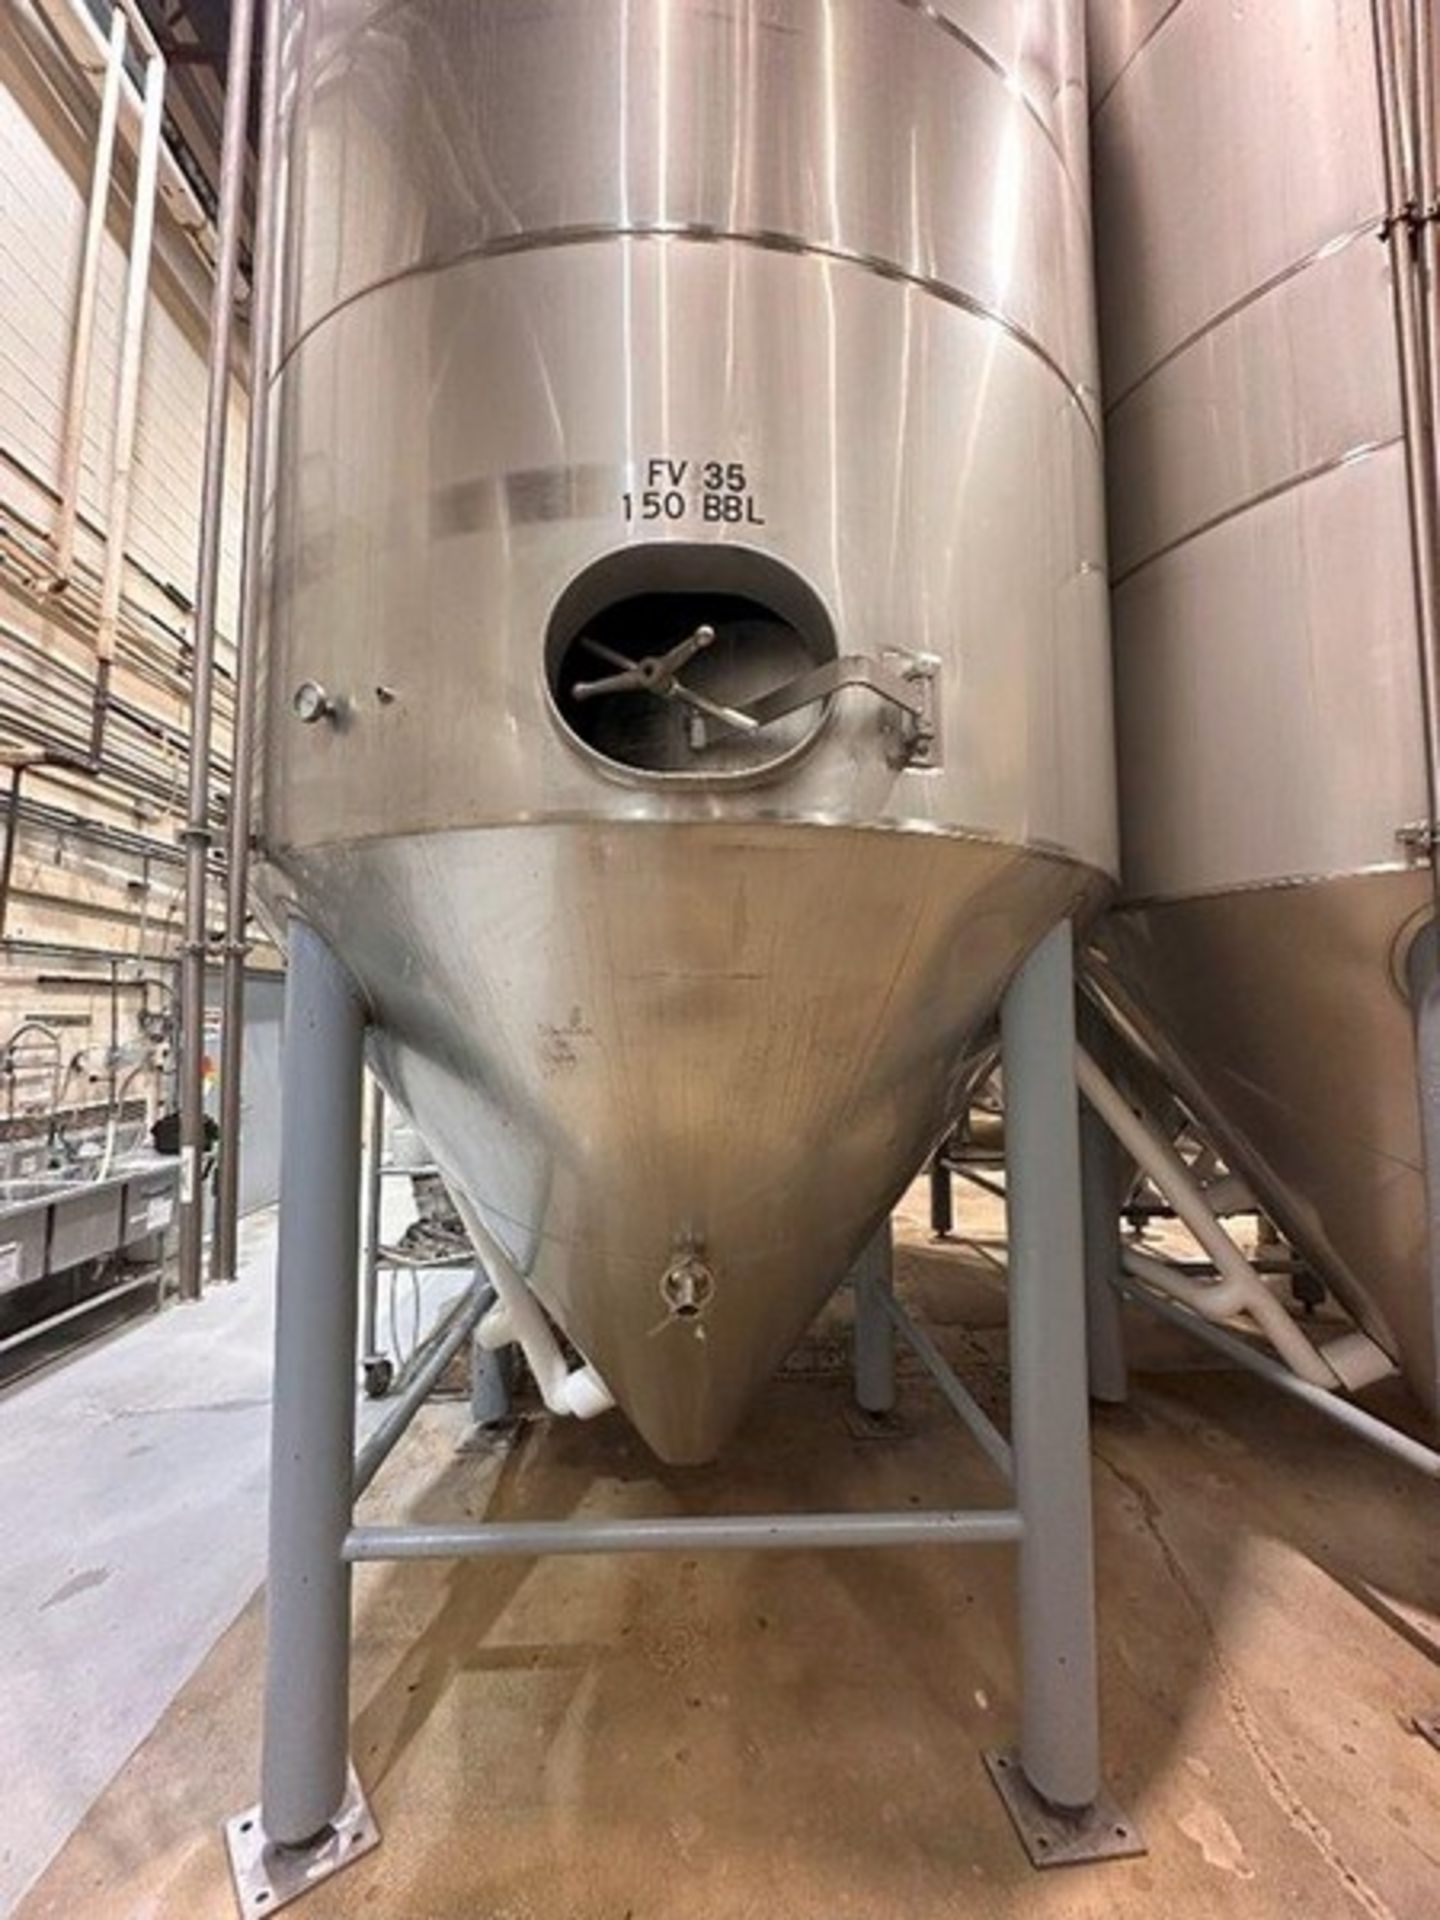 150 BBL (4650 Gallon) Vertical Cone Bottom 304 Stainless Steel Jacketed Vessel. Manufactured by Sant - Bild 3 aus 9